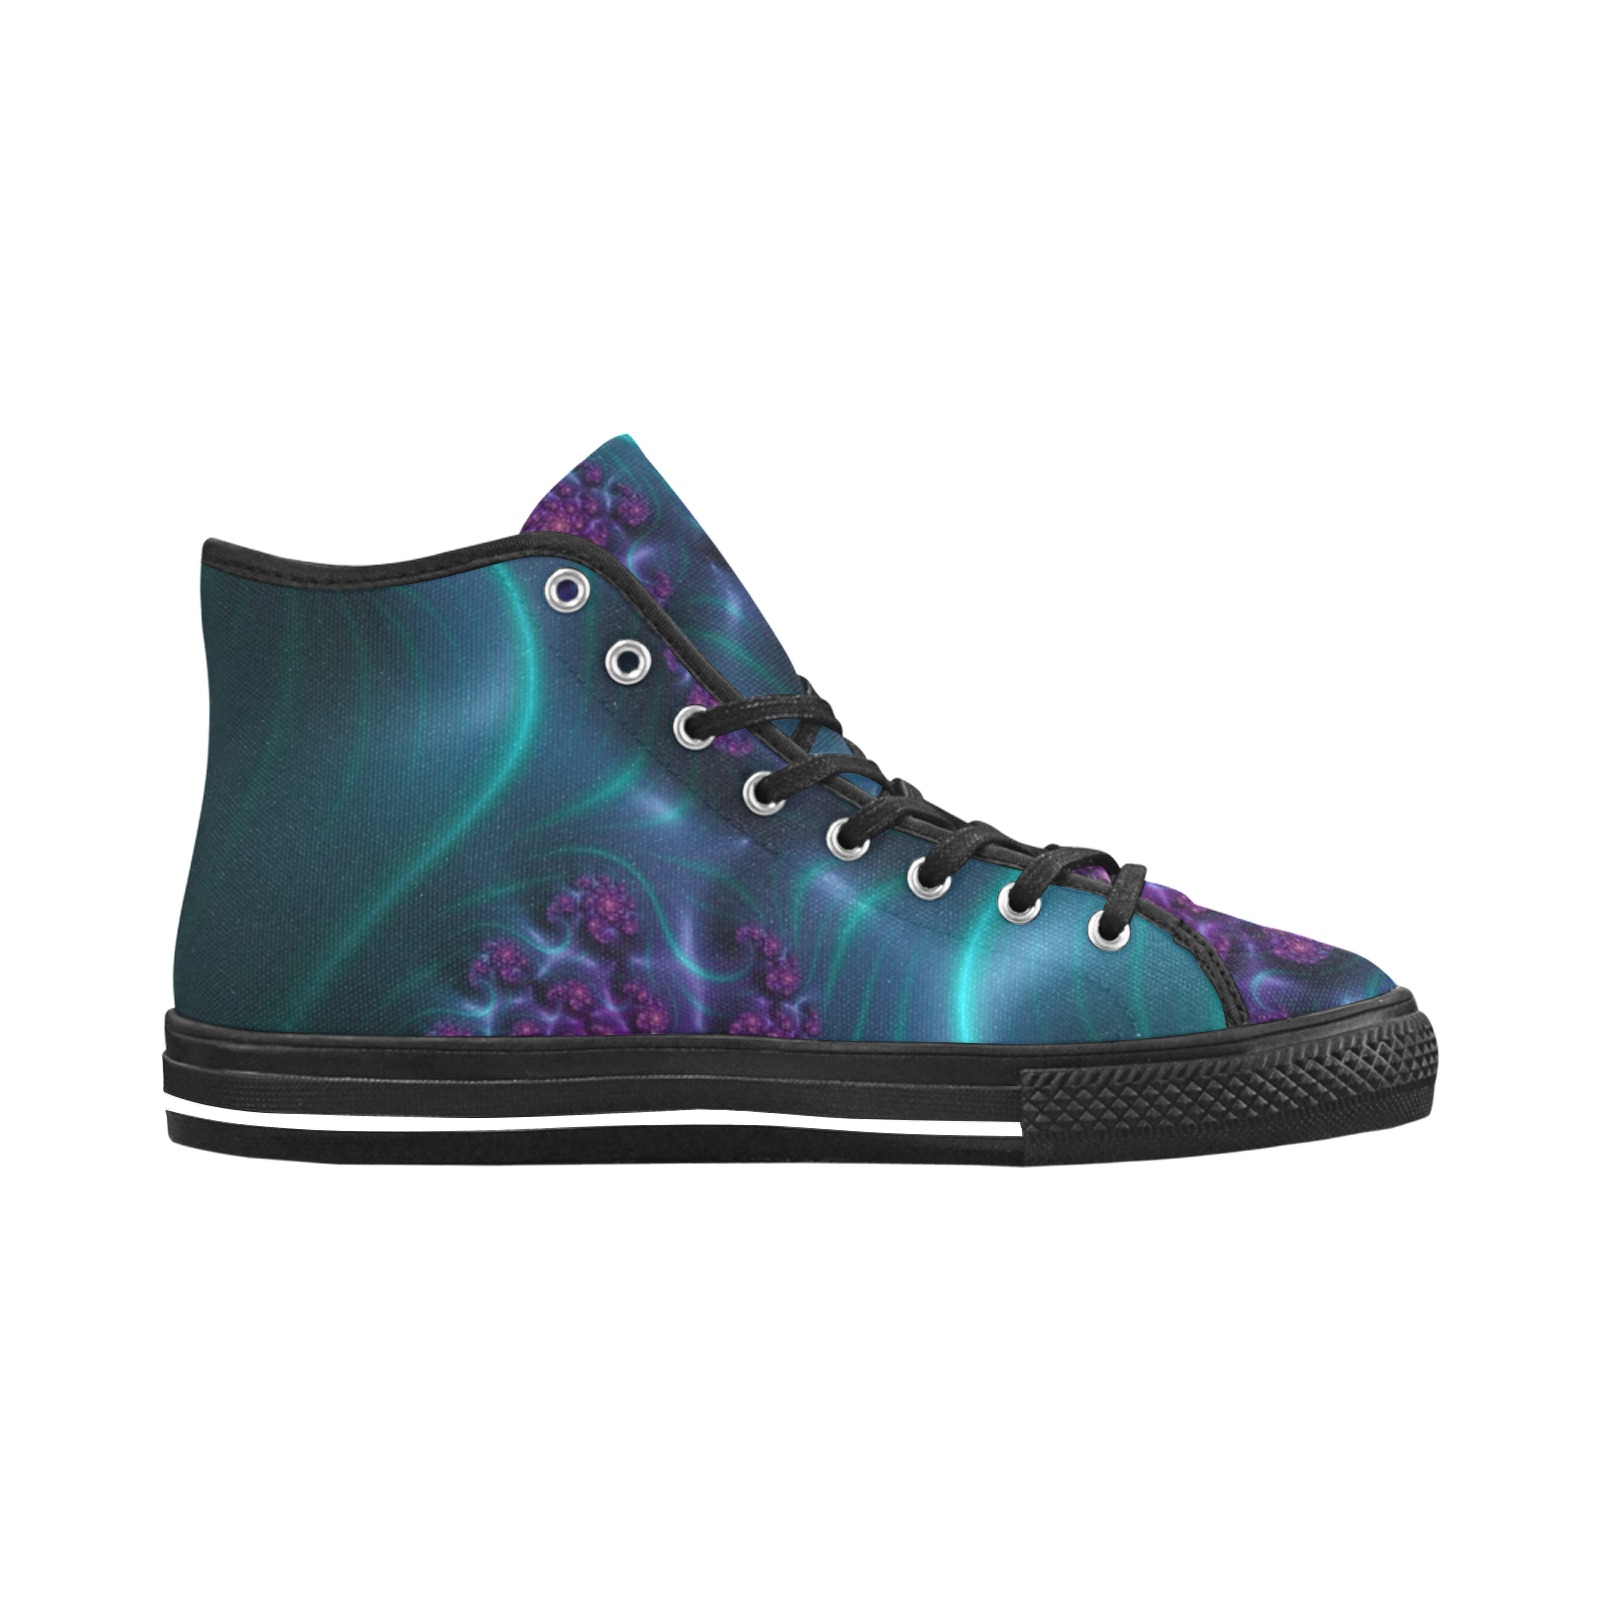 Turquoise and Purple Flowers and Seedheads Fractal Abstract Vancouver H Men's Canvas Shoes (1013-1)